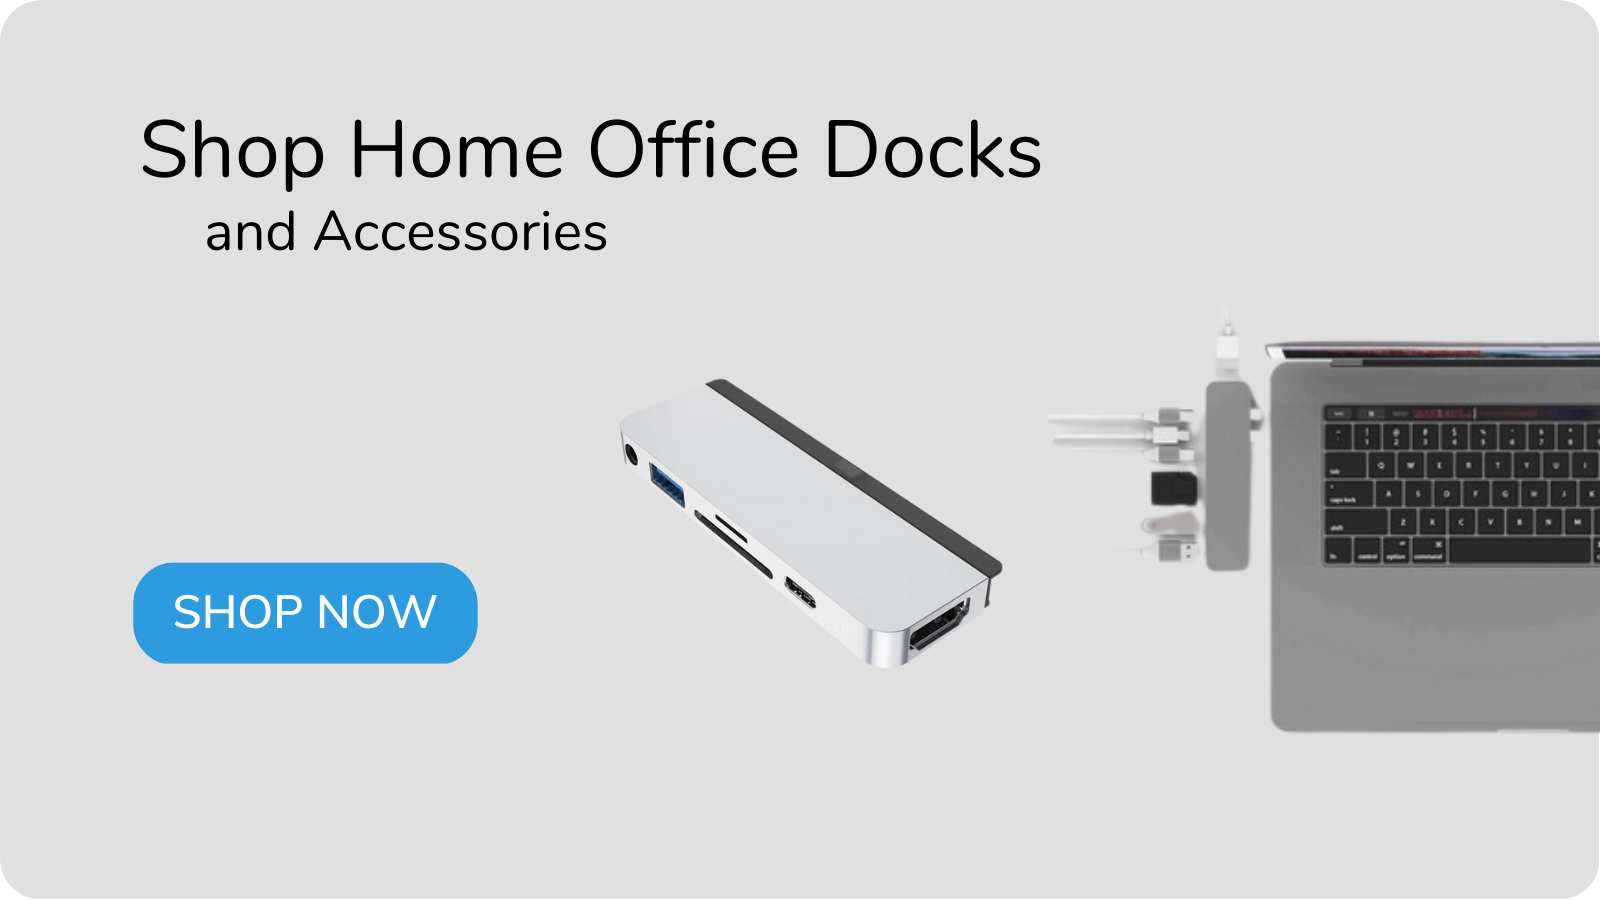 Shop Home office docks and accessories